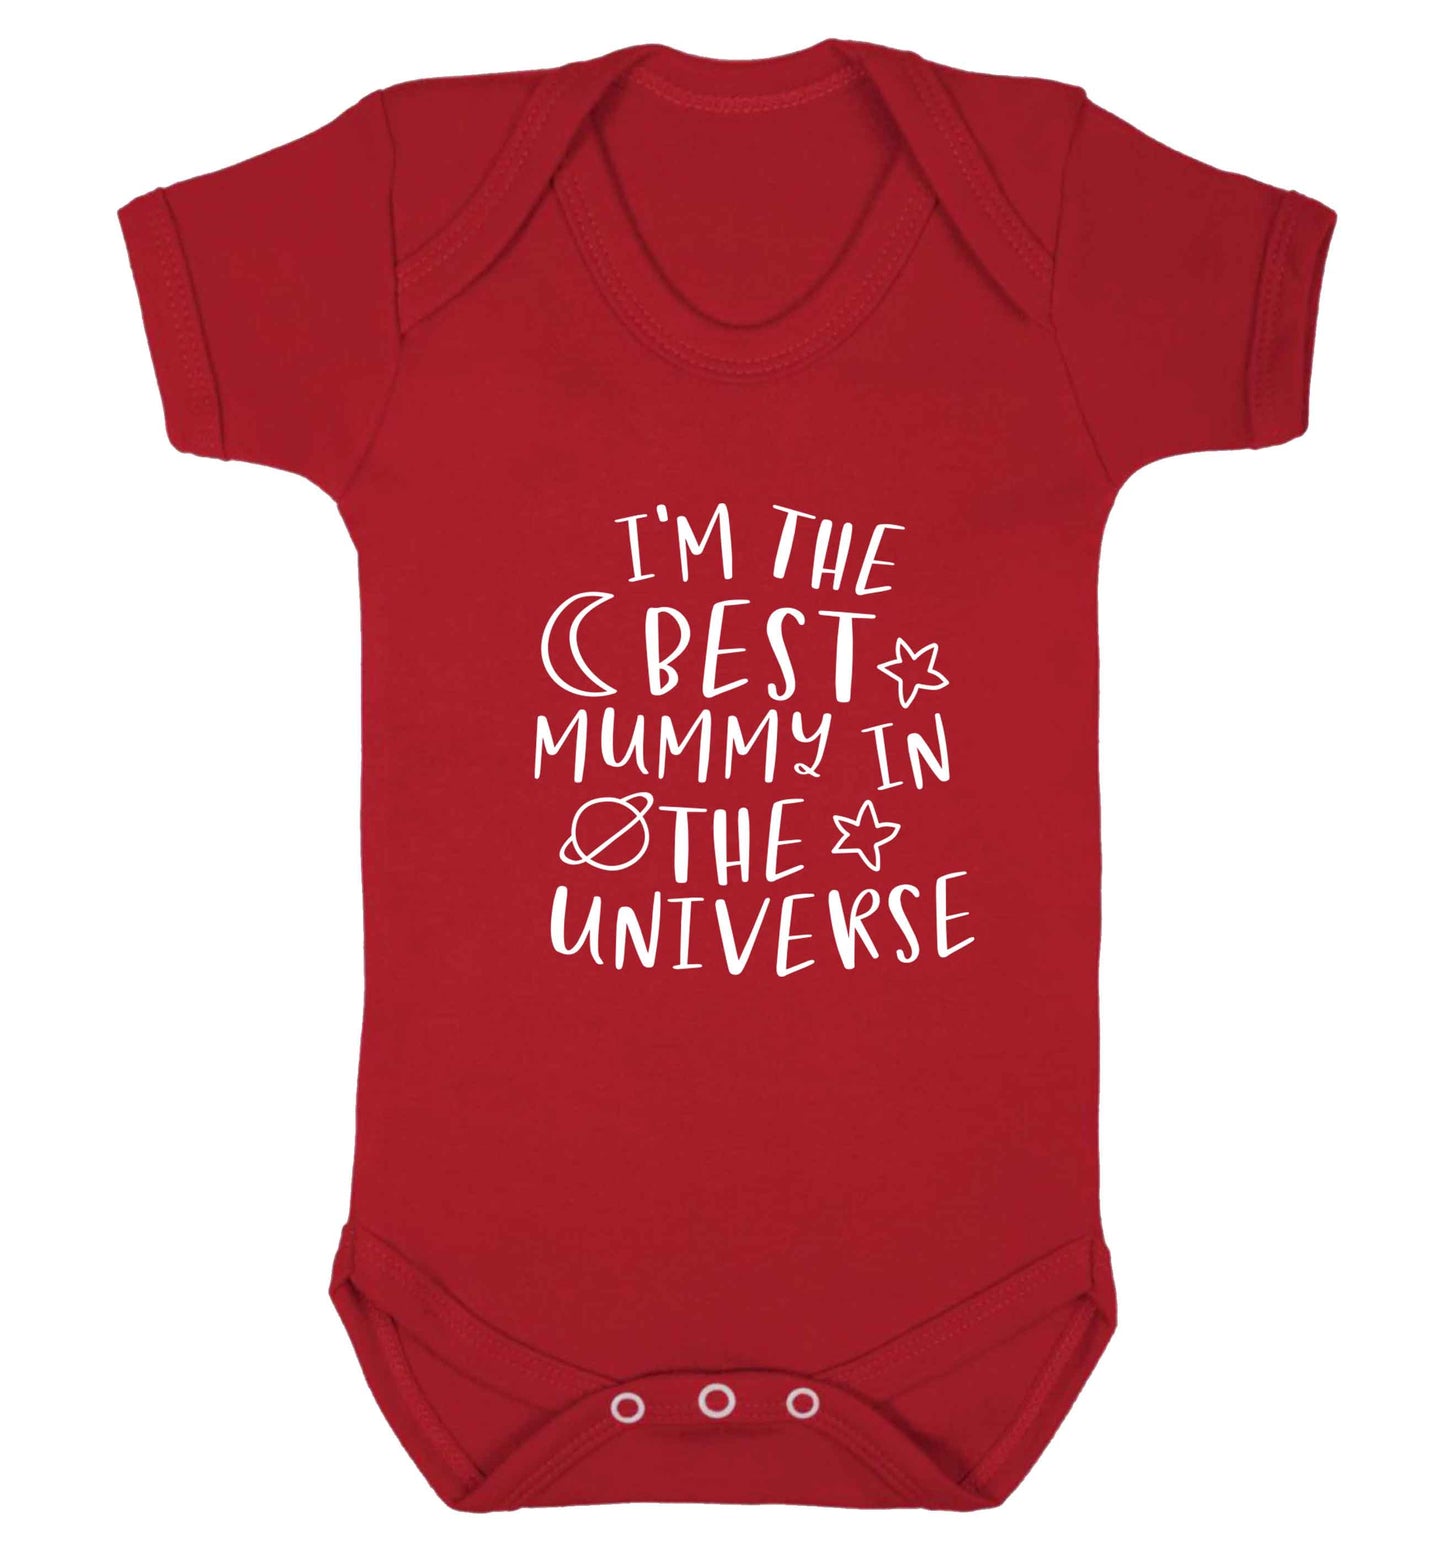 I'm the best mummy in the universe baby vest red 18-24 months